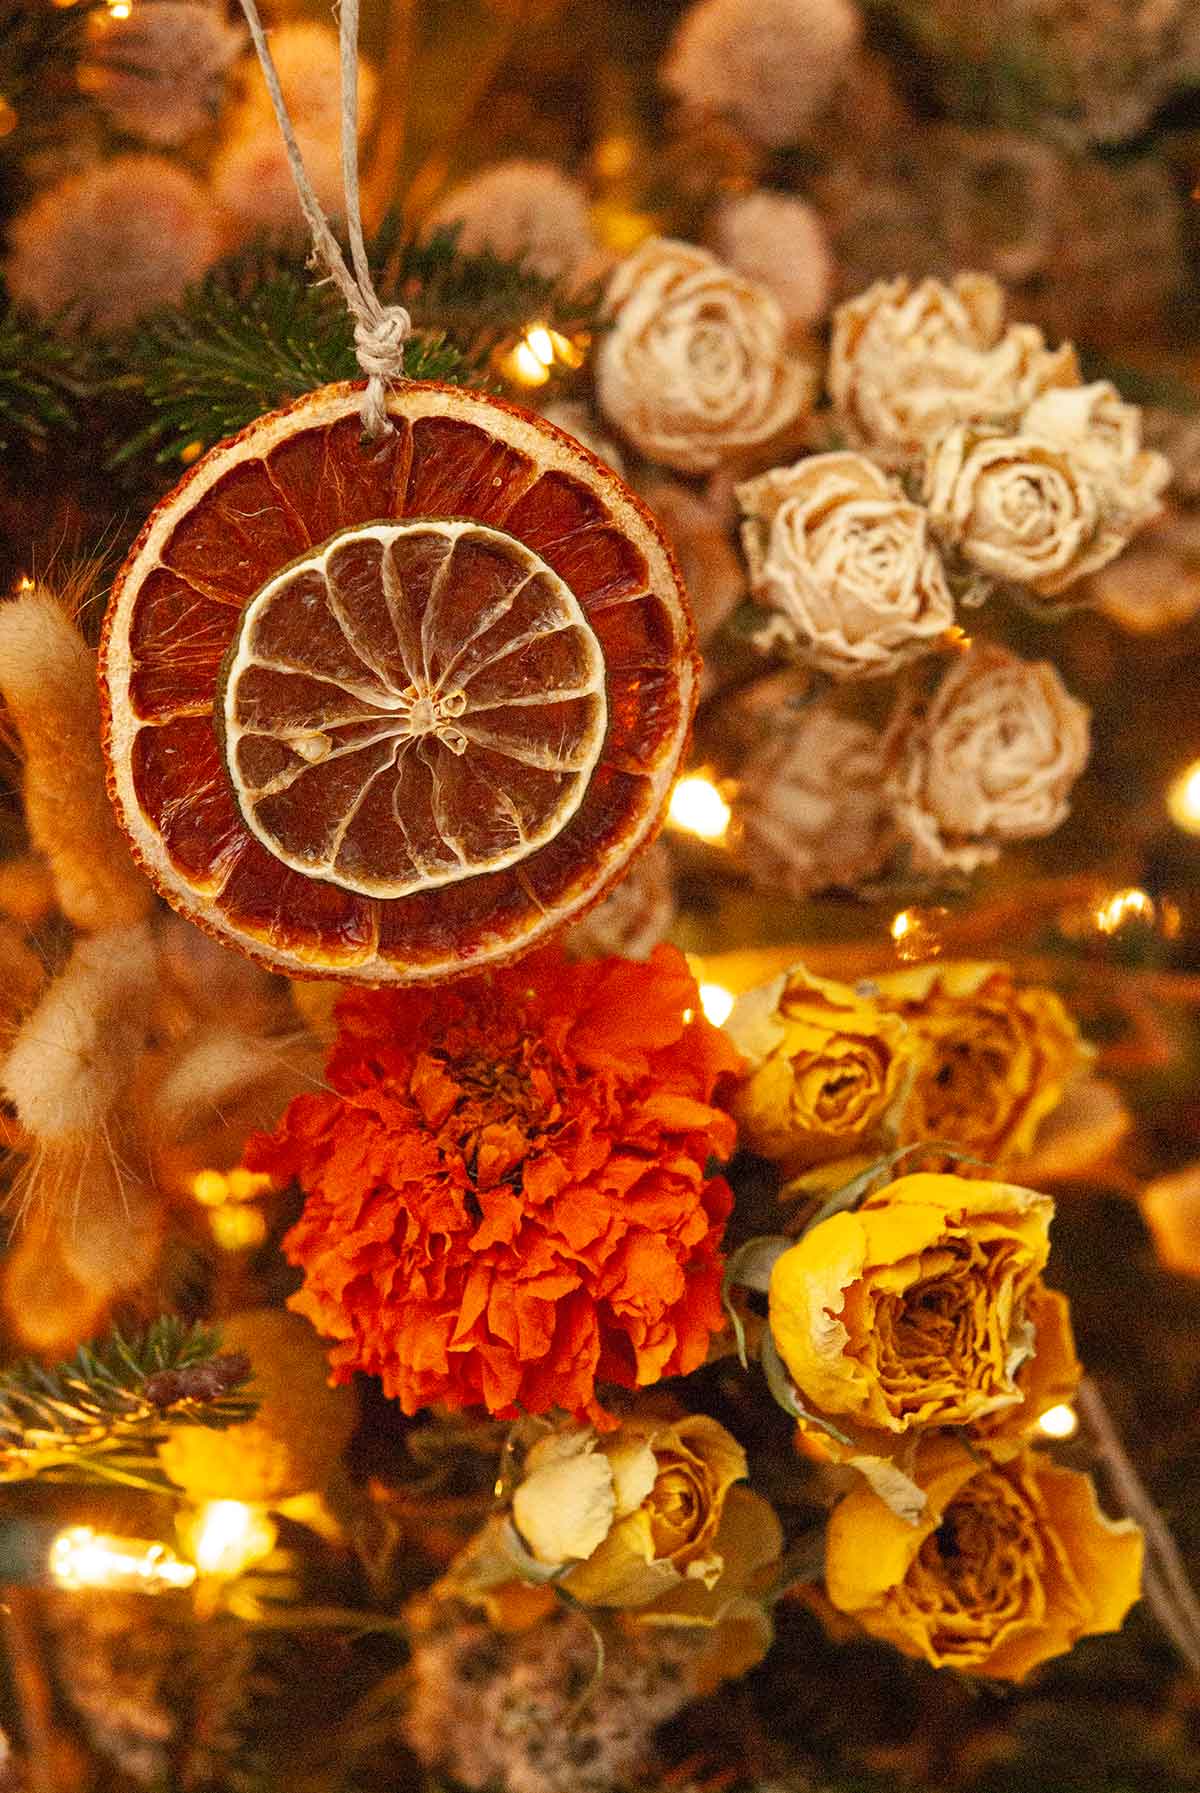 A citrus ornament in front of bright roses in a Christmas tree.